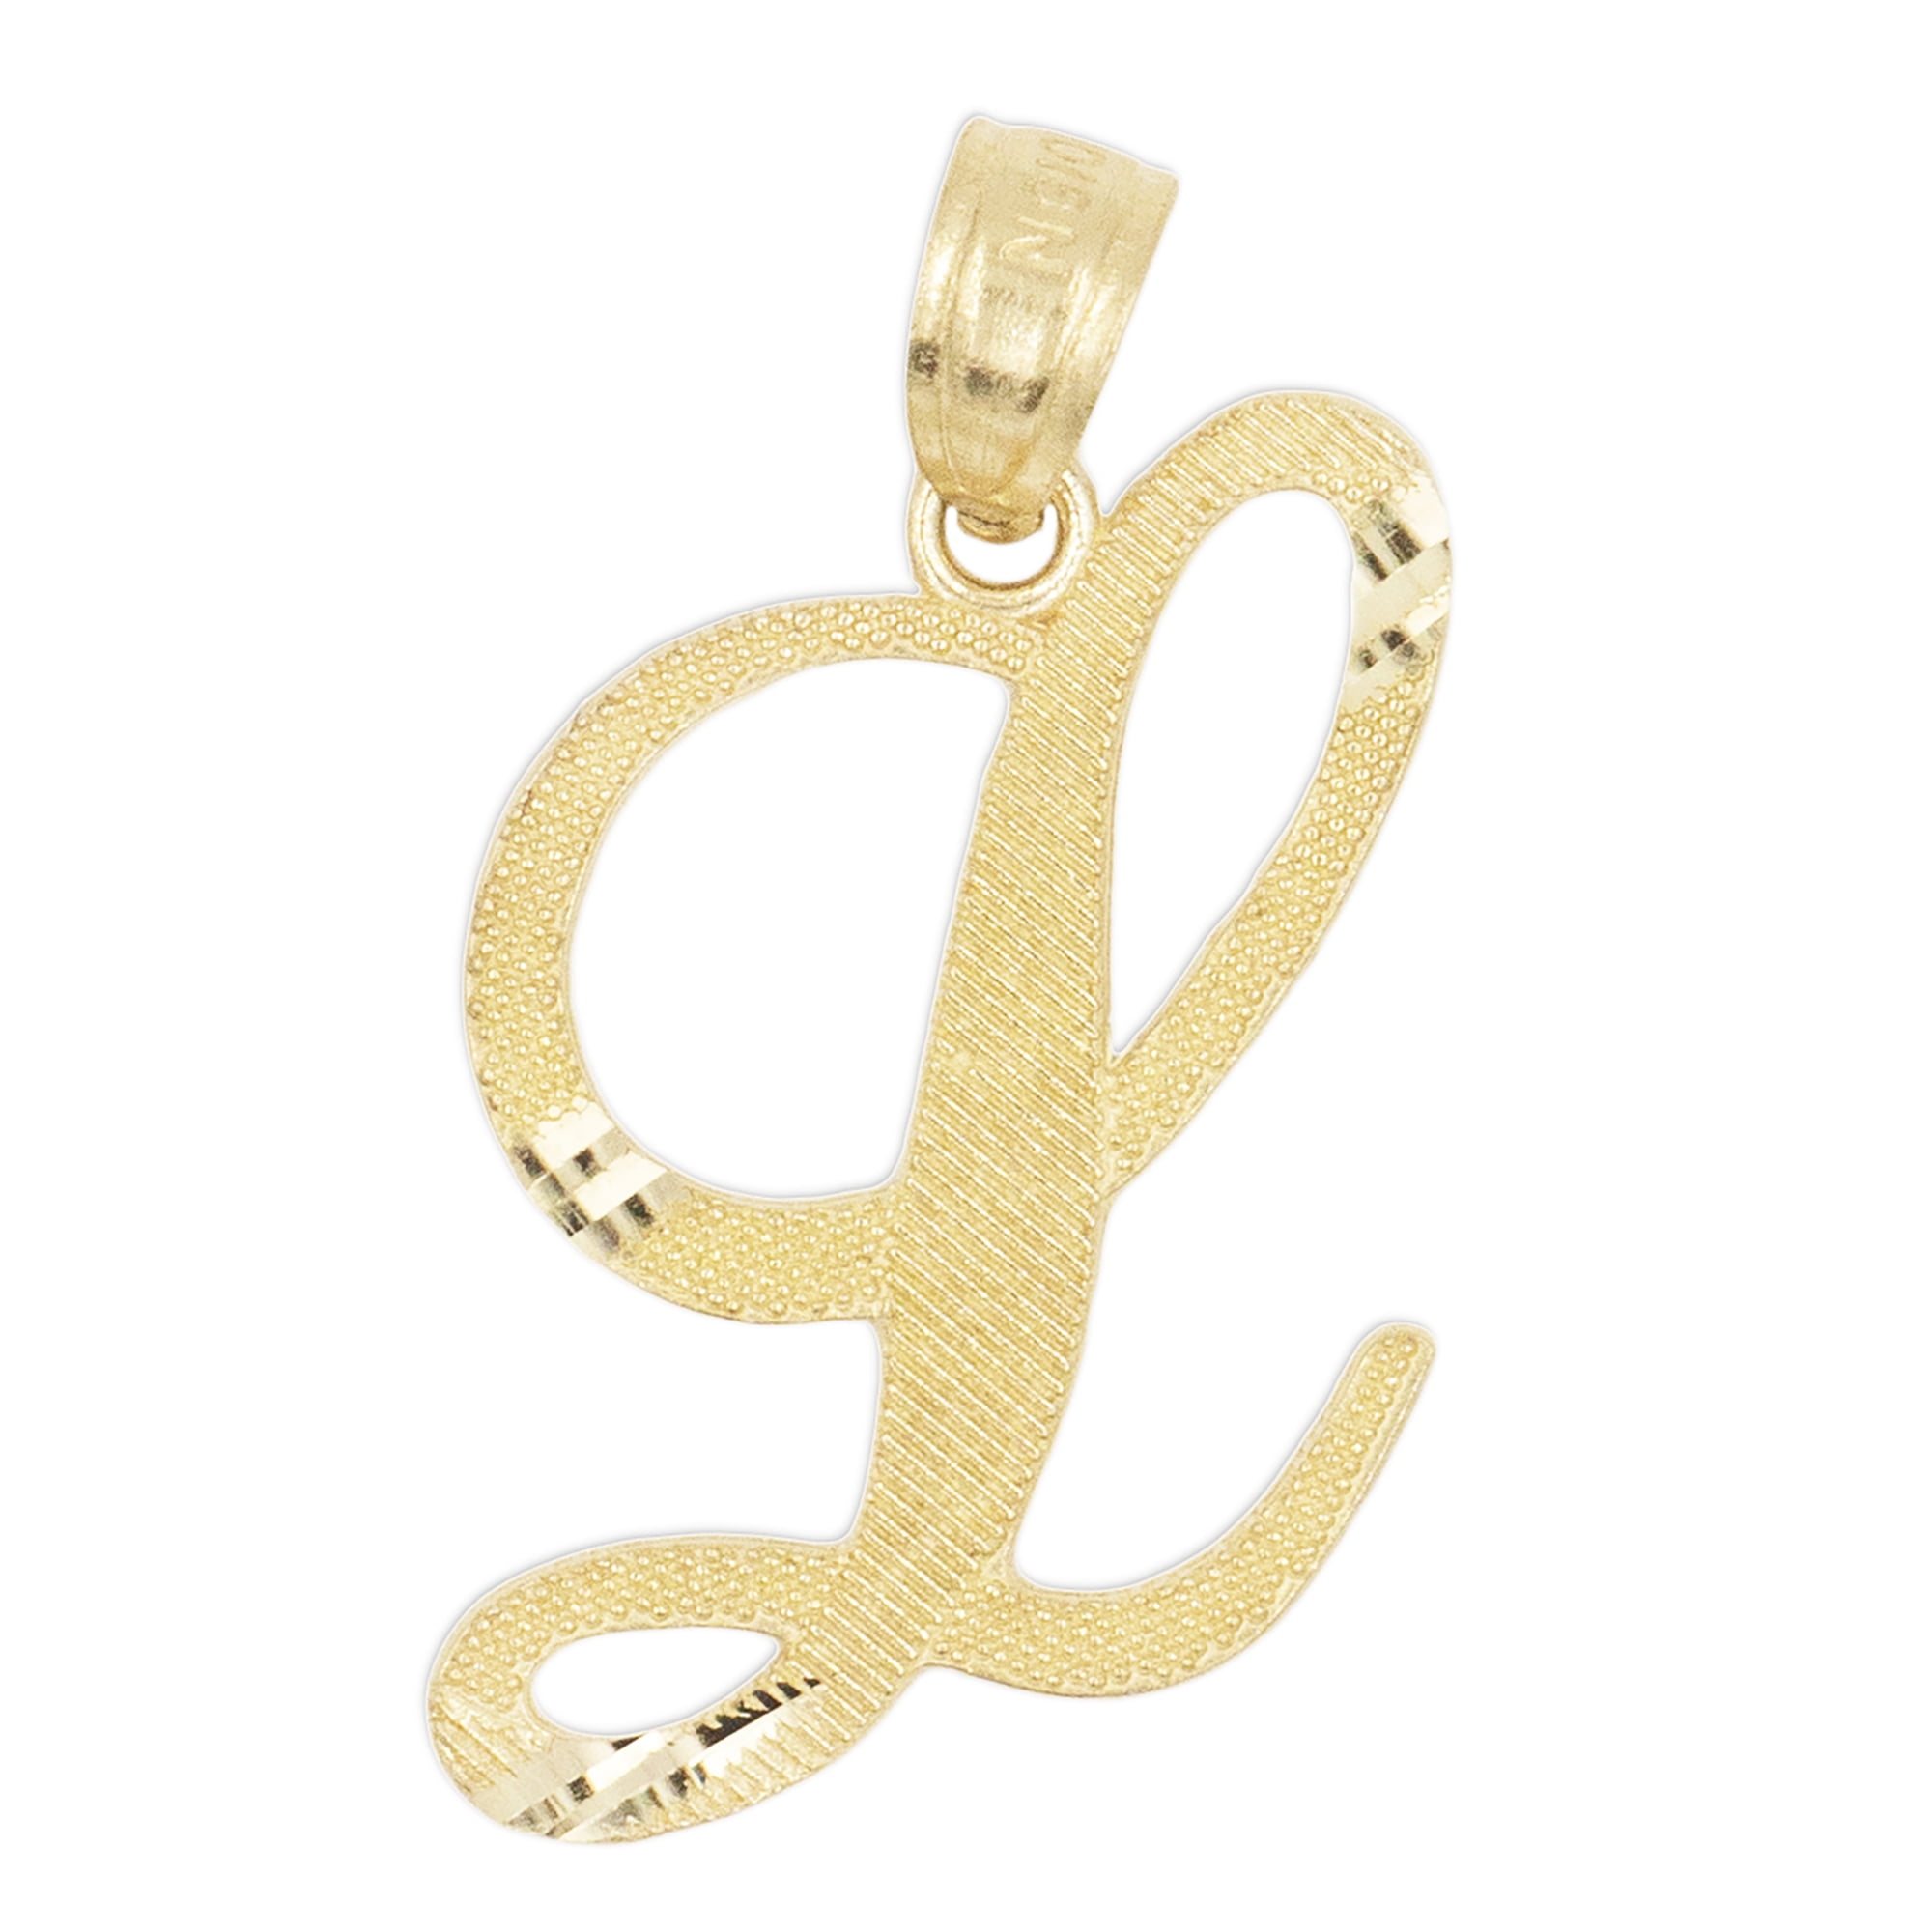 Details about   Real 10kt Yellow Gold Small Script Initial I Charm Pendant 